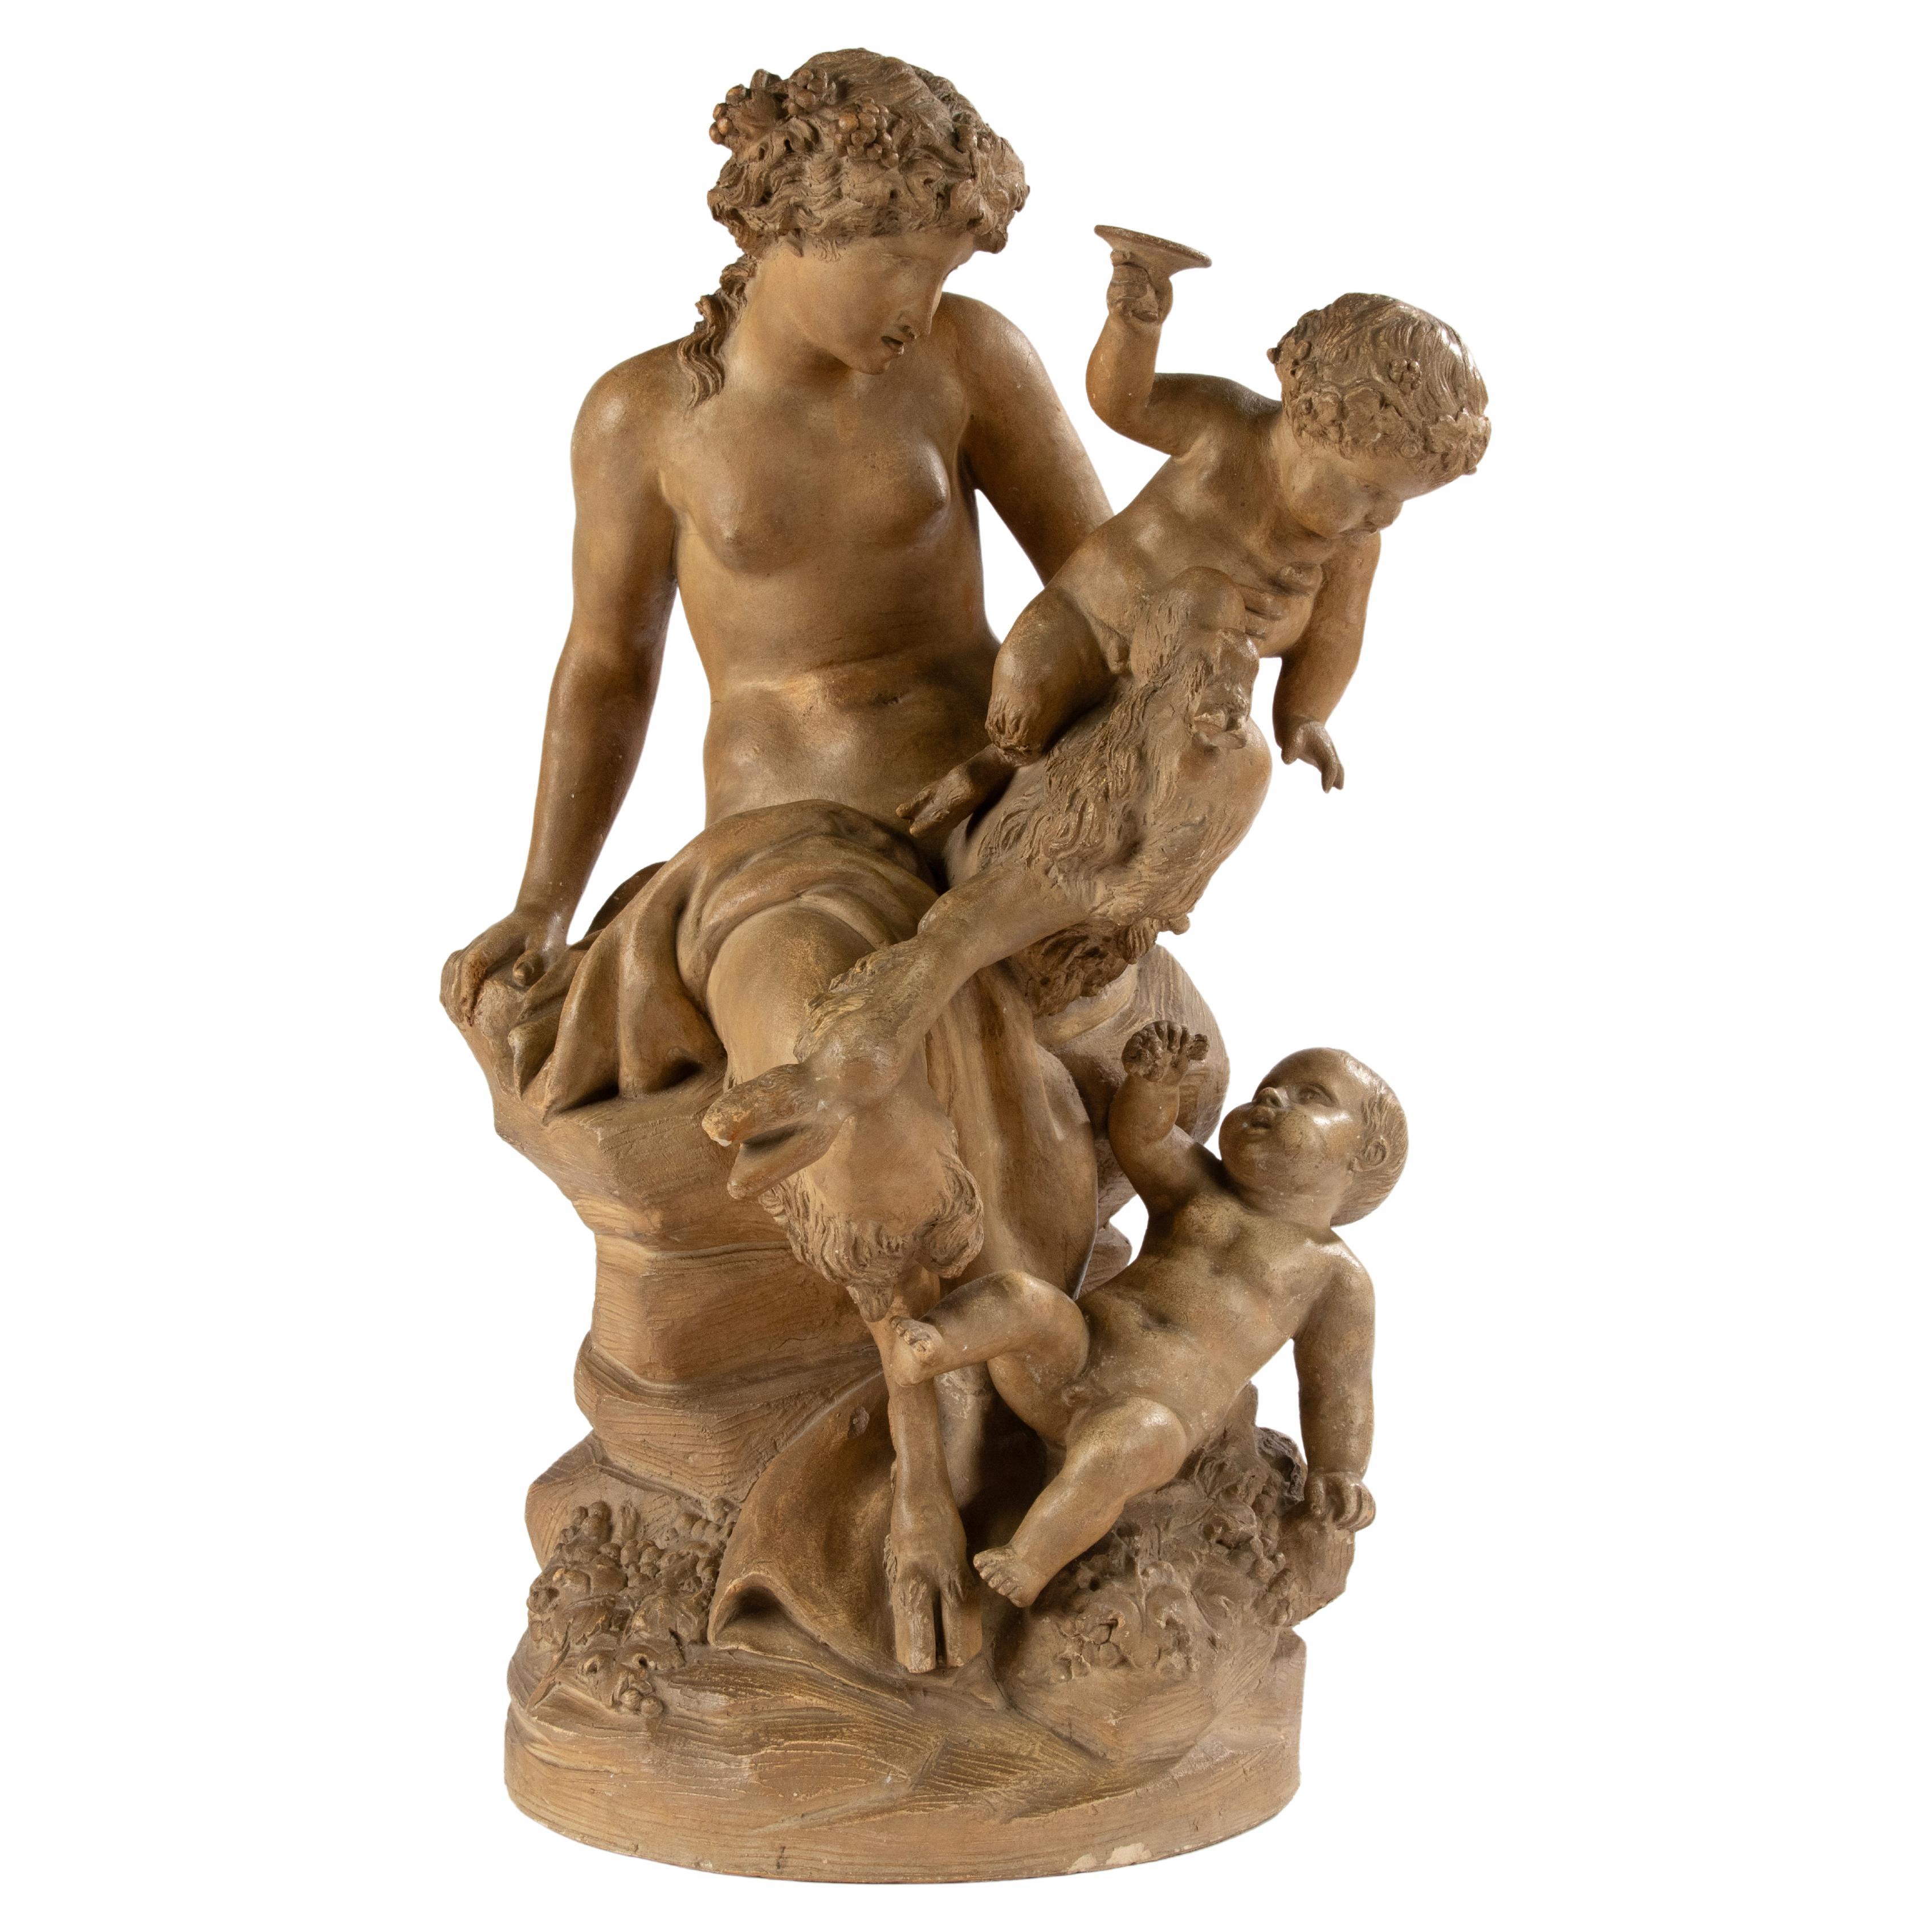 Antique Terracotta Bacchanale Sculpture with Faun and Putti - After Clodion For Sale